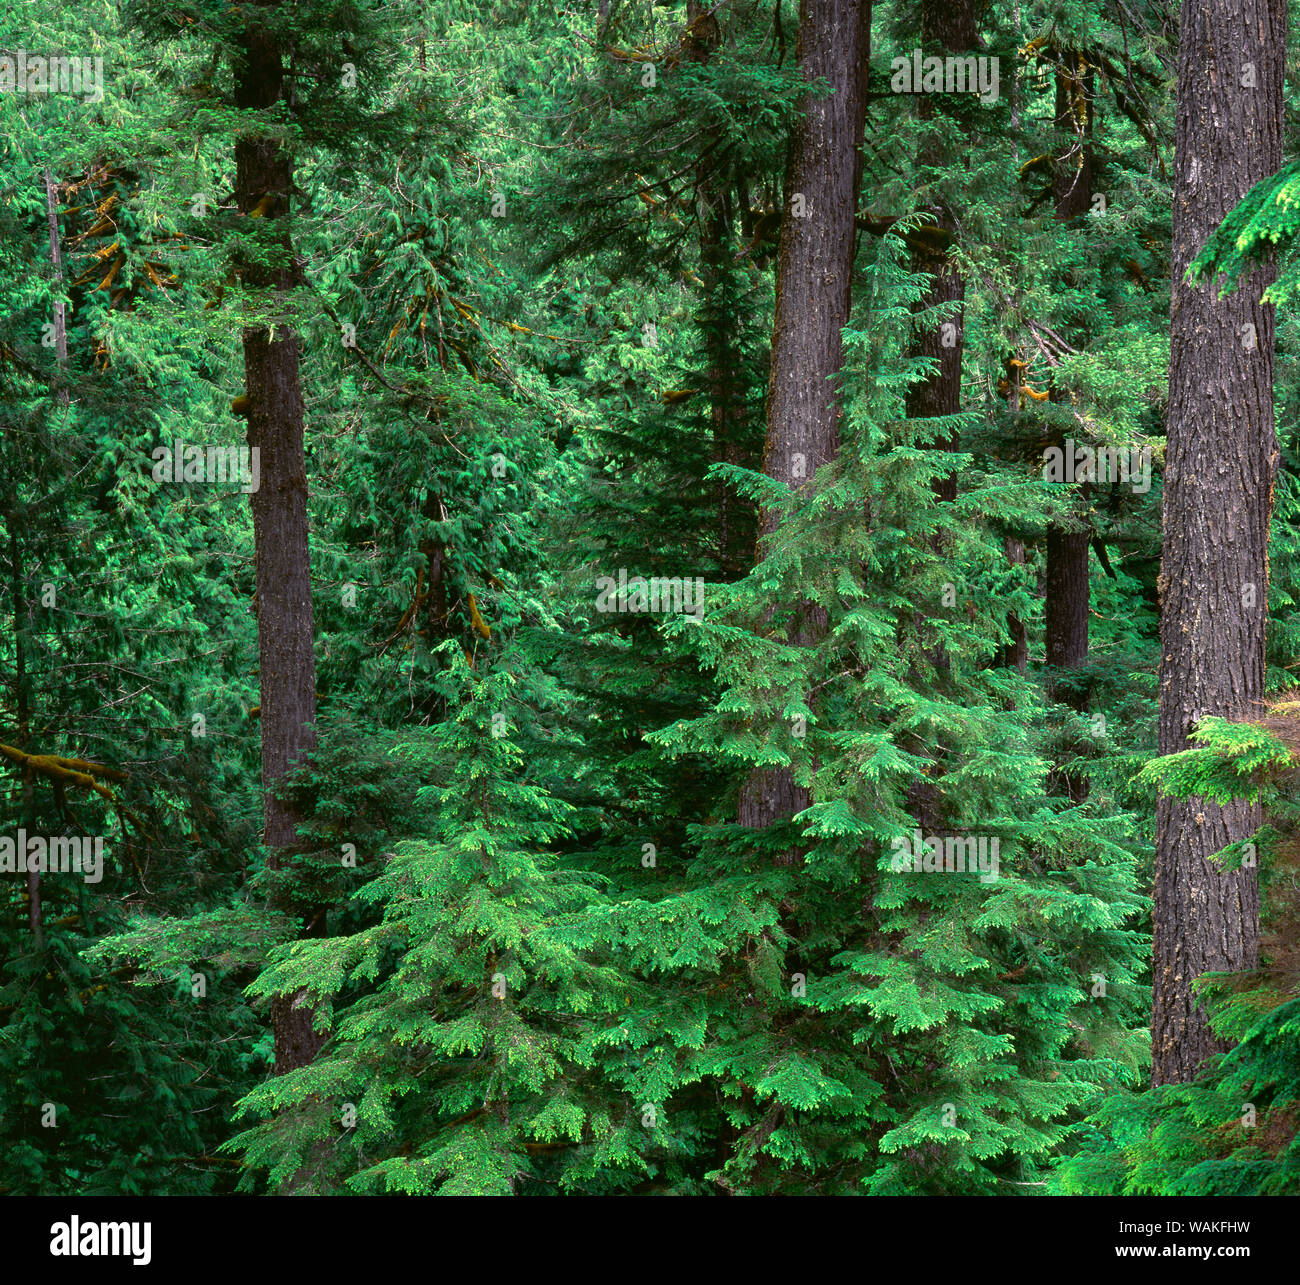 USA, Oregon. Willamette National Forest, Middle Santiam Wilderness, Old-growth forest with large Douglas fir and western hemlock trees. Stock Photo